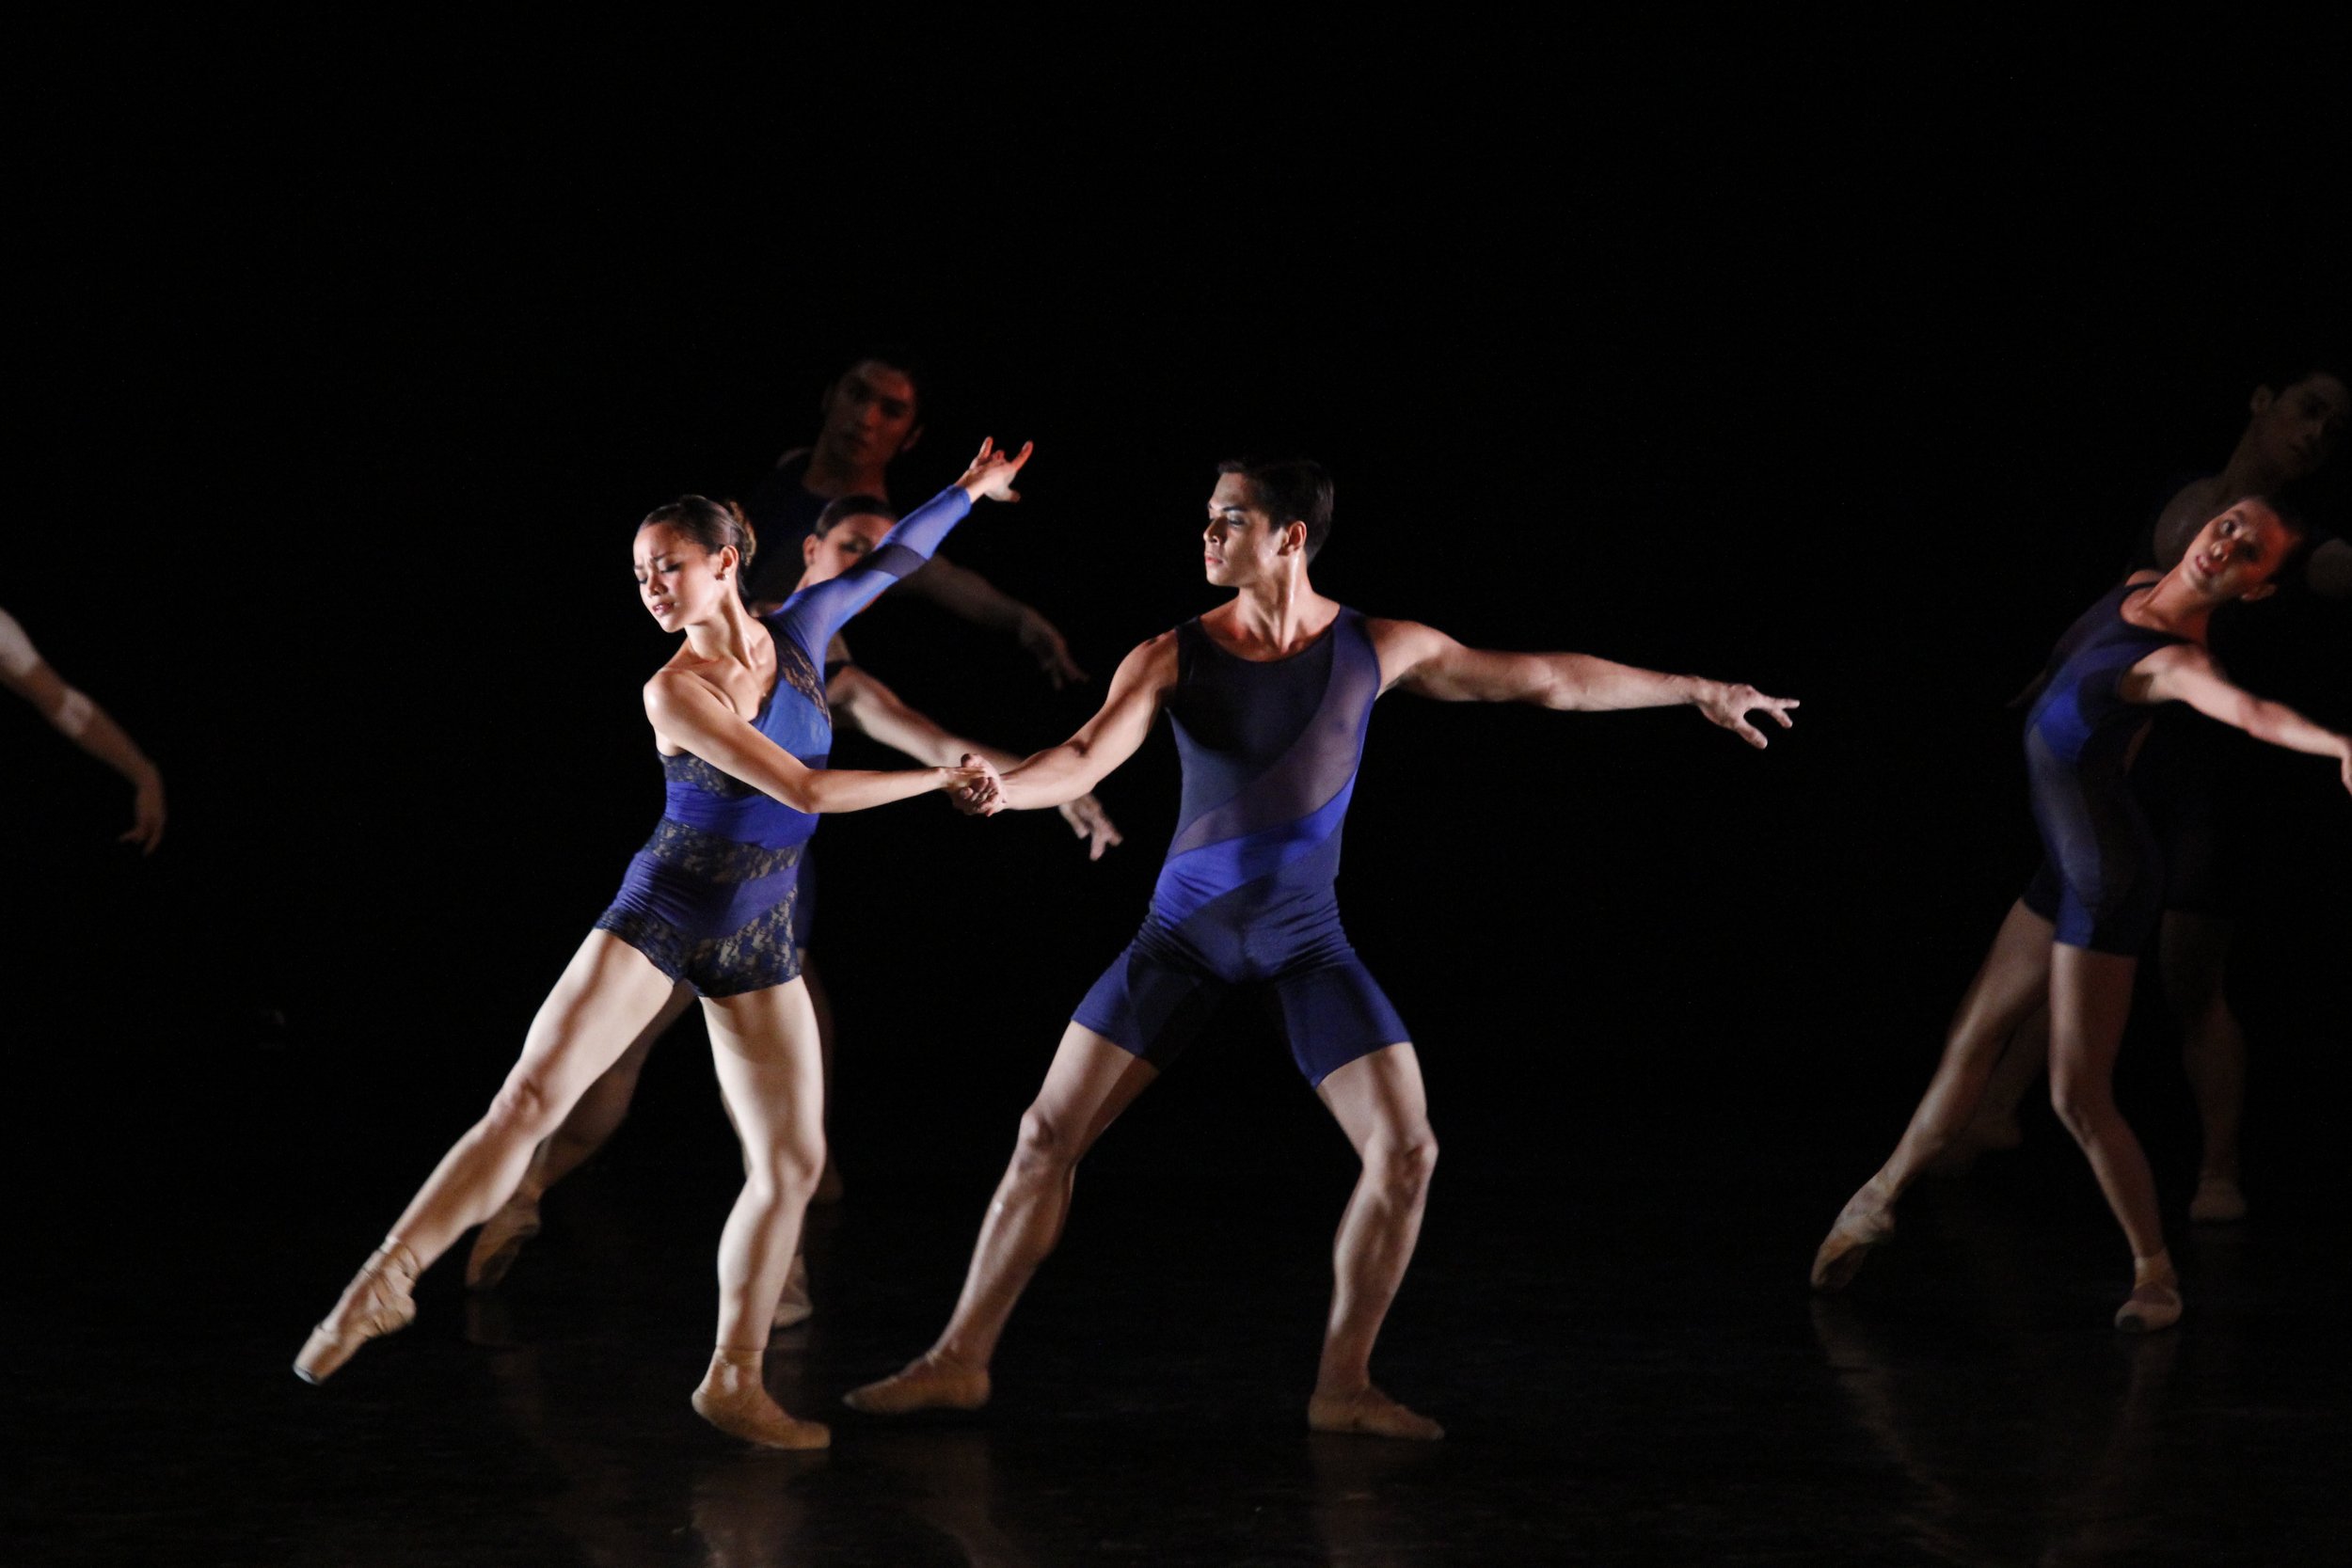    The varying hues of blue in the dancers’ outfits, led by Dawna Reign Mangahas and Mark Sumaylo, reflect the concept being explored by choreographer Jonathan Watkins in his work  Present Process  which premiered in  Two!  (2014). “It looks at the c